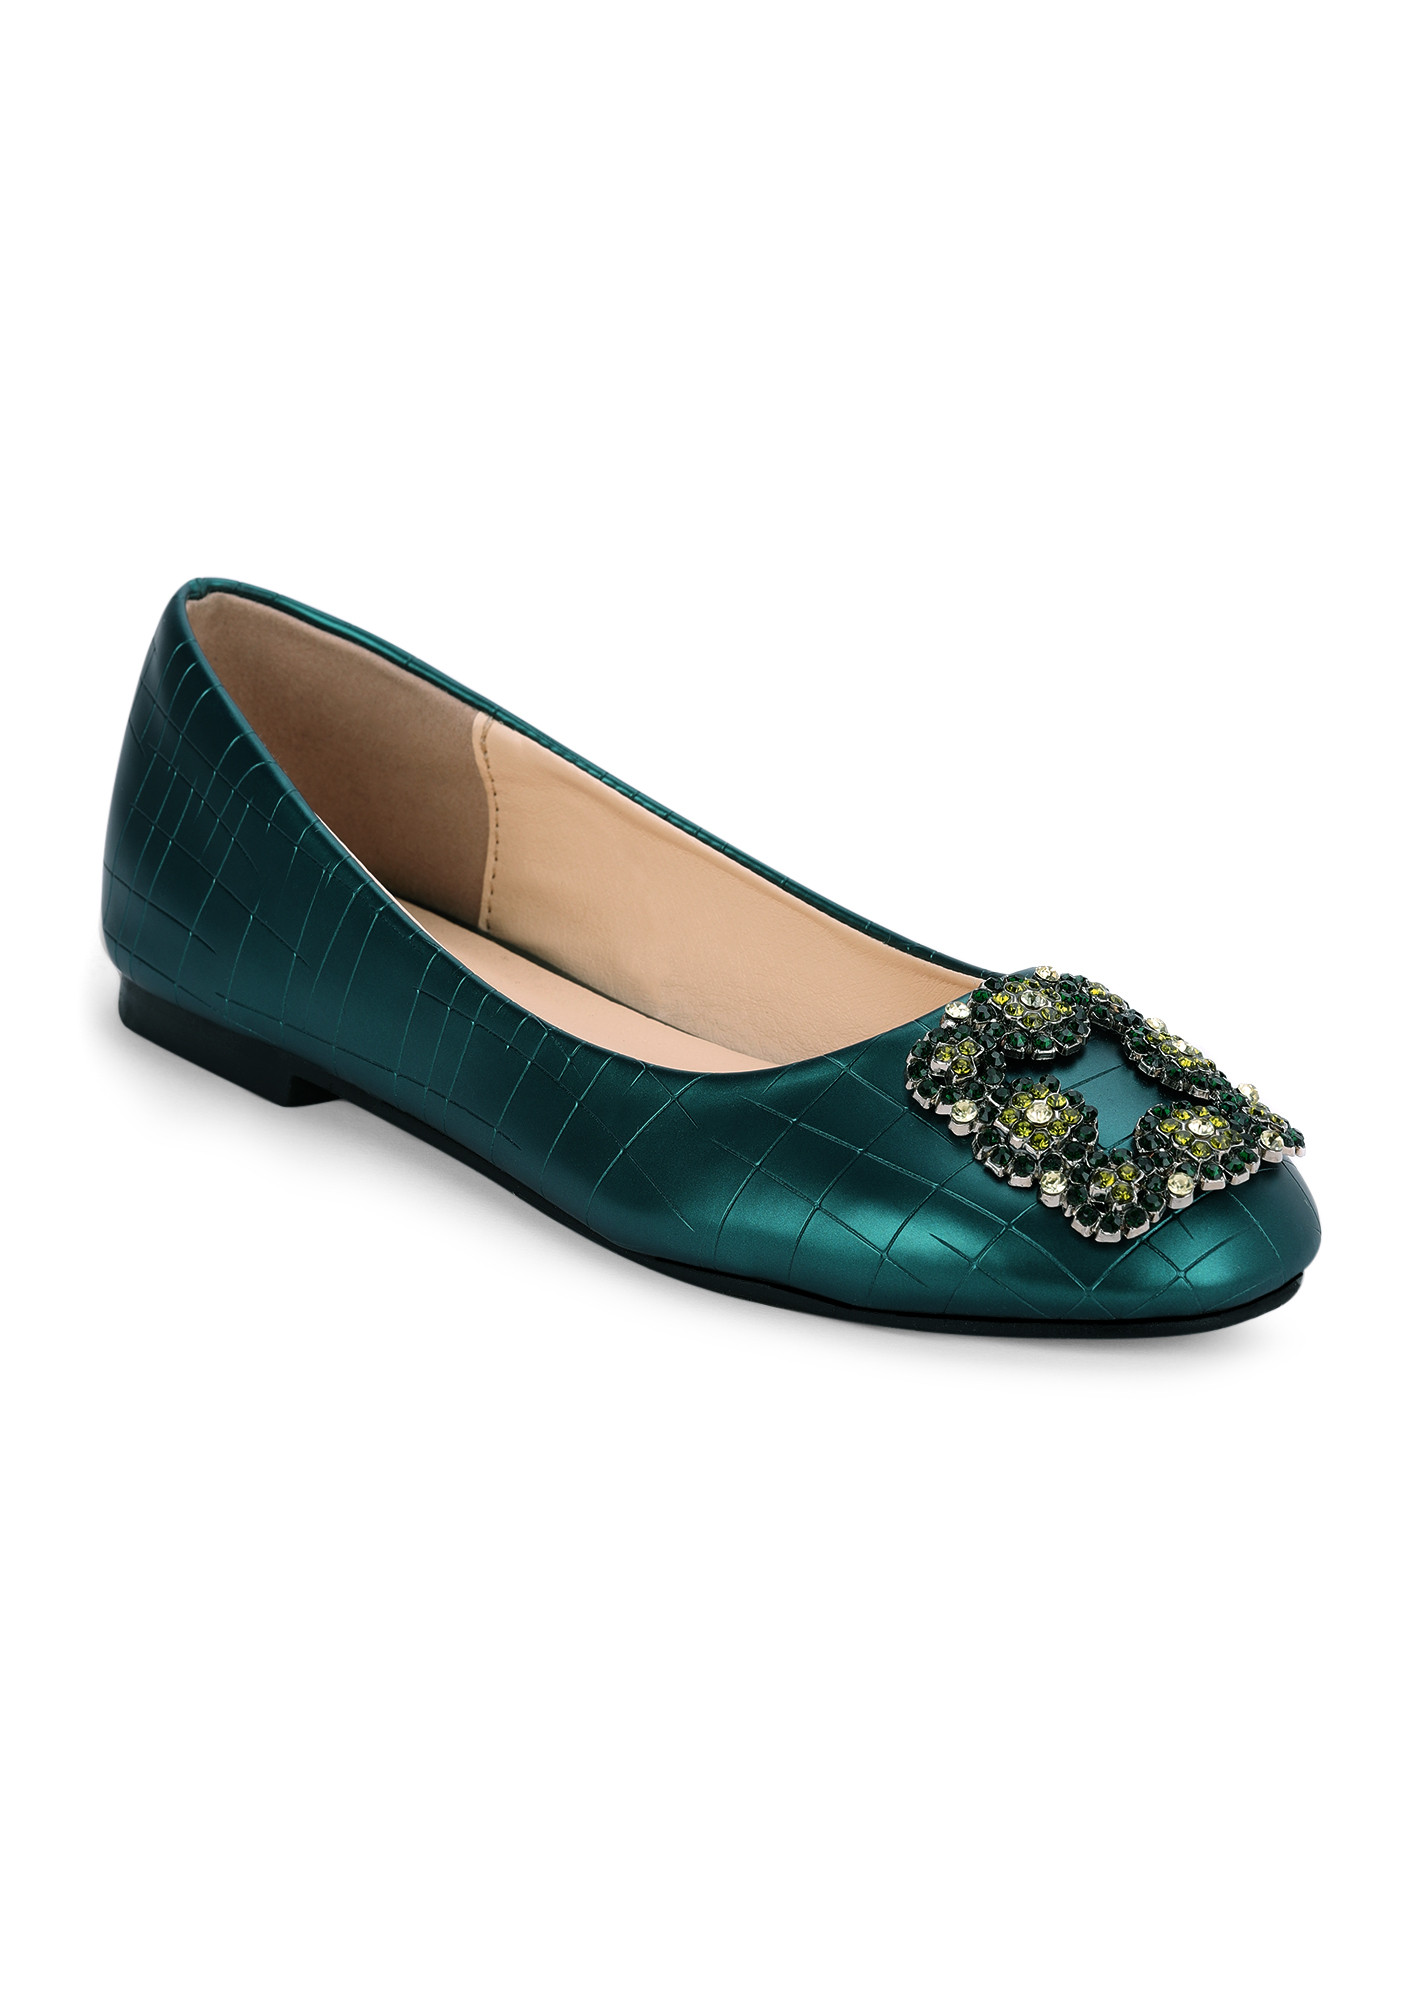 CLASS AND SASS BLUE FLAT SHOES